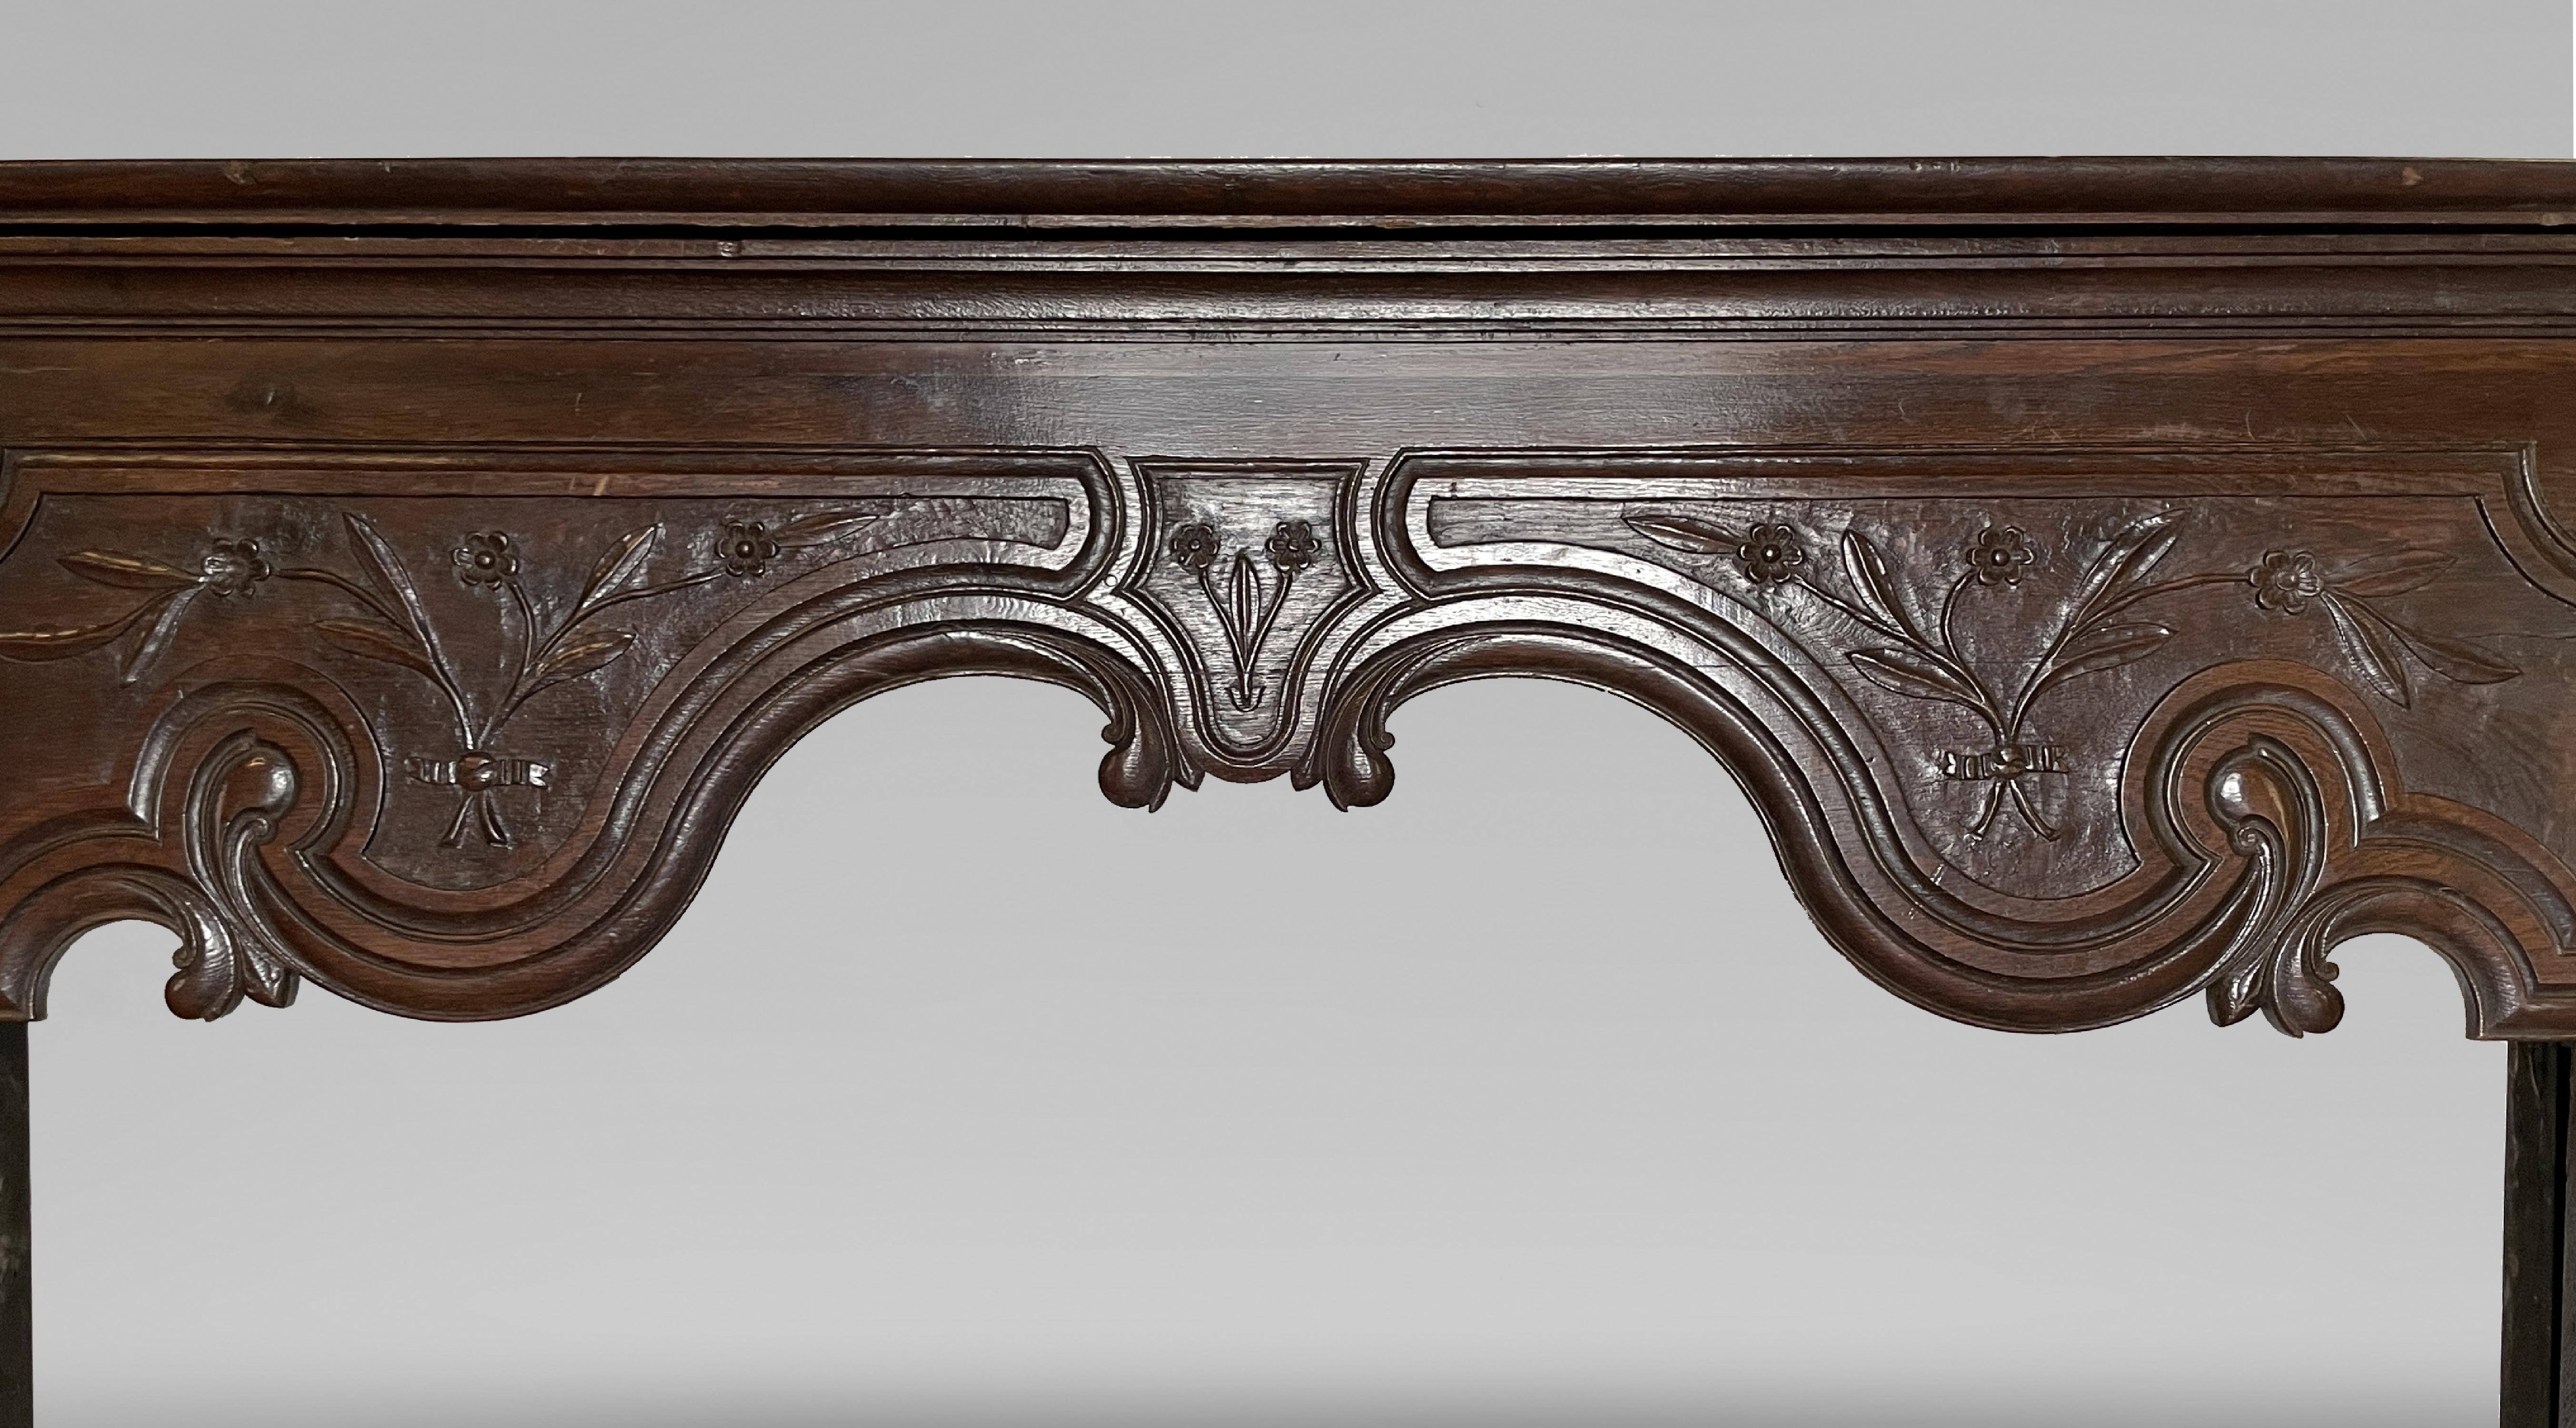 This antique fireplace from the 19th century is made from oak. The curved and graceful lines strewn throughout the piece are a classic attribute of the Louis XV style. Carvings of three bouquets of delicate flowers with their leaves are also added